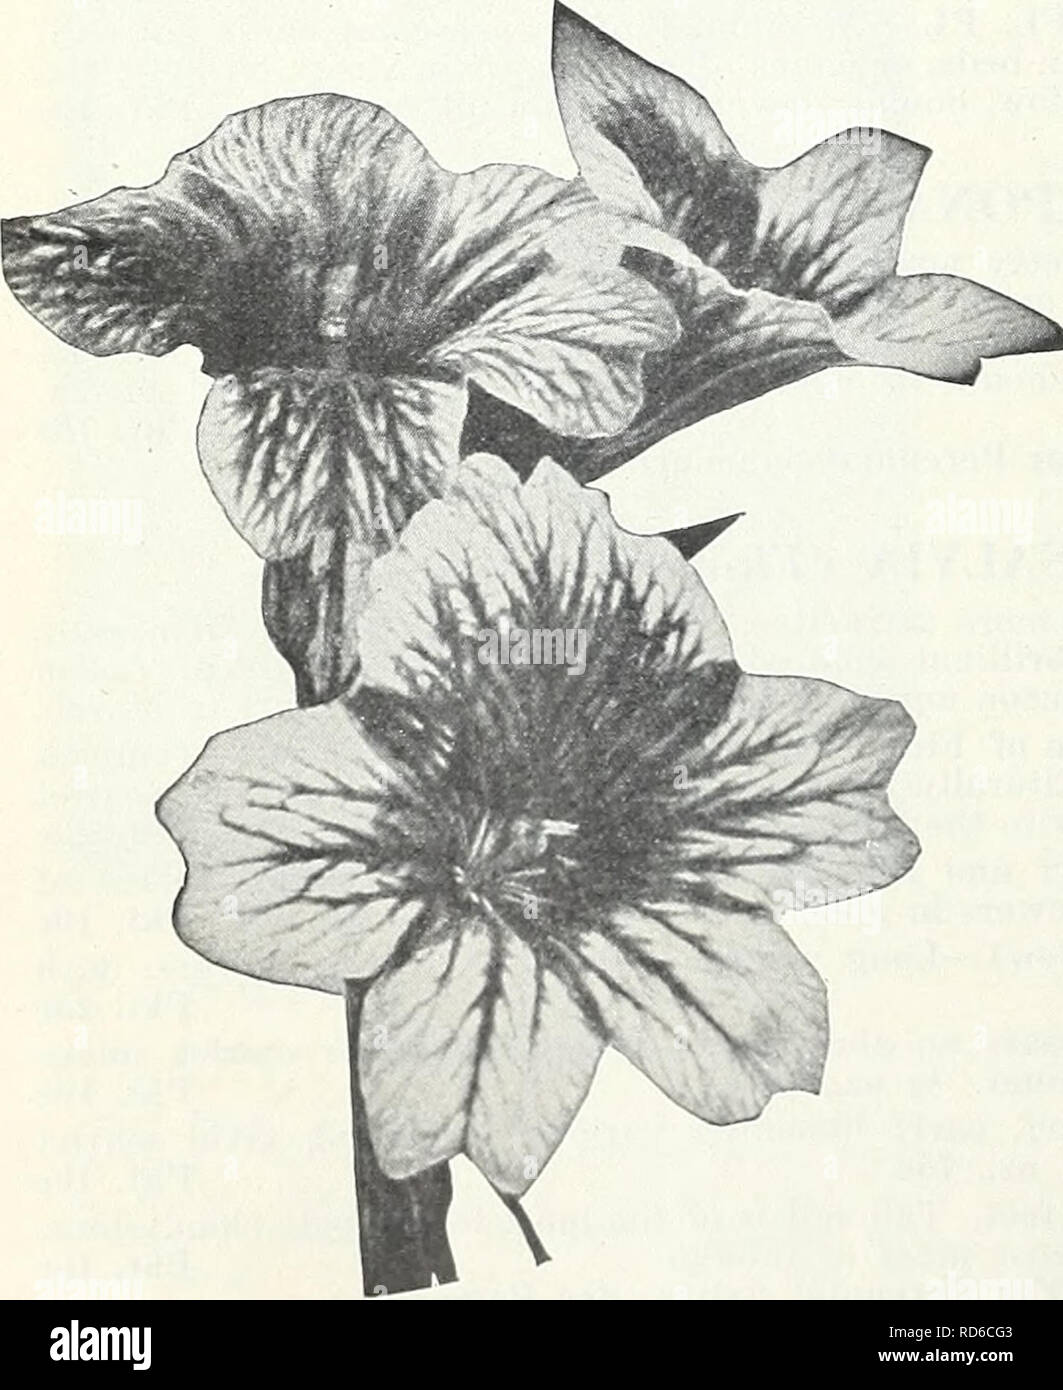 . Currie's garden annual : spring 1934 59th year. Flowers Seeds Catalogs; Bulbs (Plants) Seeds Catalogs; Vegetables Seeds Catalogs; Nurseries (Horticulture) Catalogs; Plants, Ornamental Catalogs; Gardening Equipment and supplies Catalogs. SILENE (Catchfly) PENDULA COMPACTA—Dwarf, hardy annual, bearing pretty, pink flowers freely; 6 inches. .... Pkt. 10c (For Perennial Seeds, See Page 54). SCABIOSA GIANT LOVELINESS Loveliness is a glorious new color in annual Scabiosa, the blossoms range through varying tones of delicate Salmon Rose, it is unsurpassed as a cut flower. It has long, stiff stems a Stock Photo